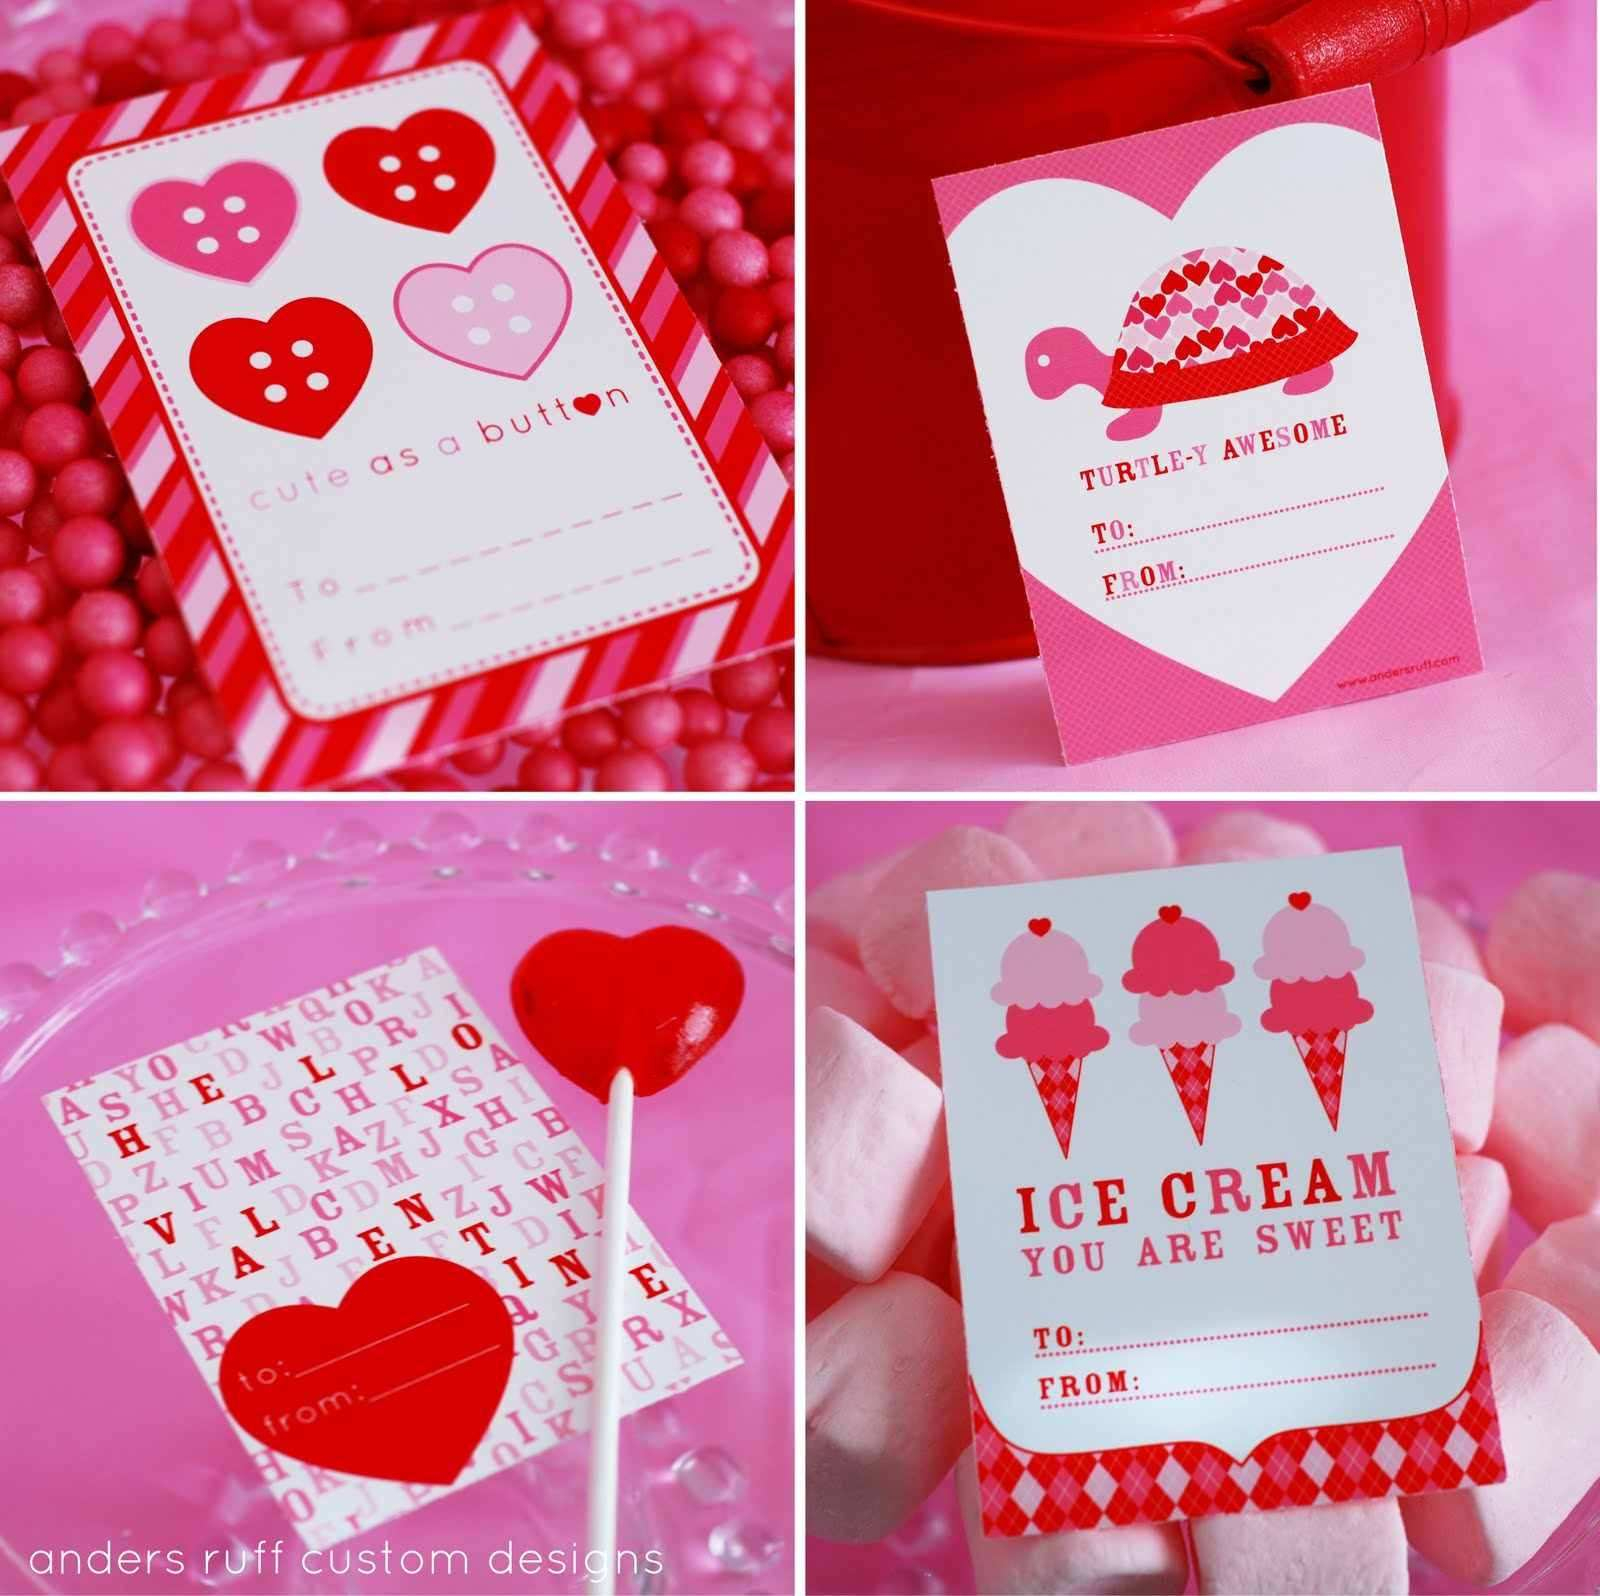 Unique Gift Ideas For Husband Valentines Day Free Printable - Free Printable Valentine Cards For Husband